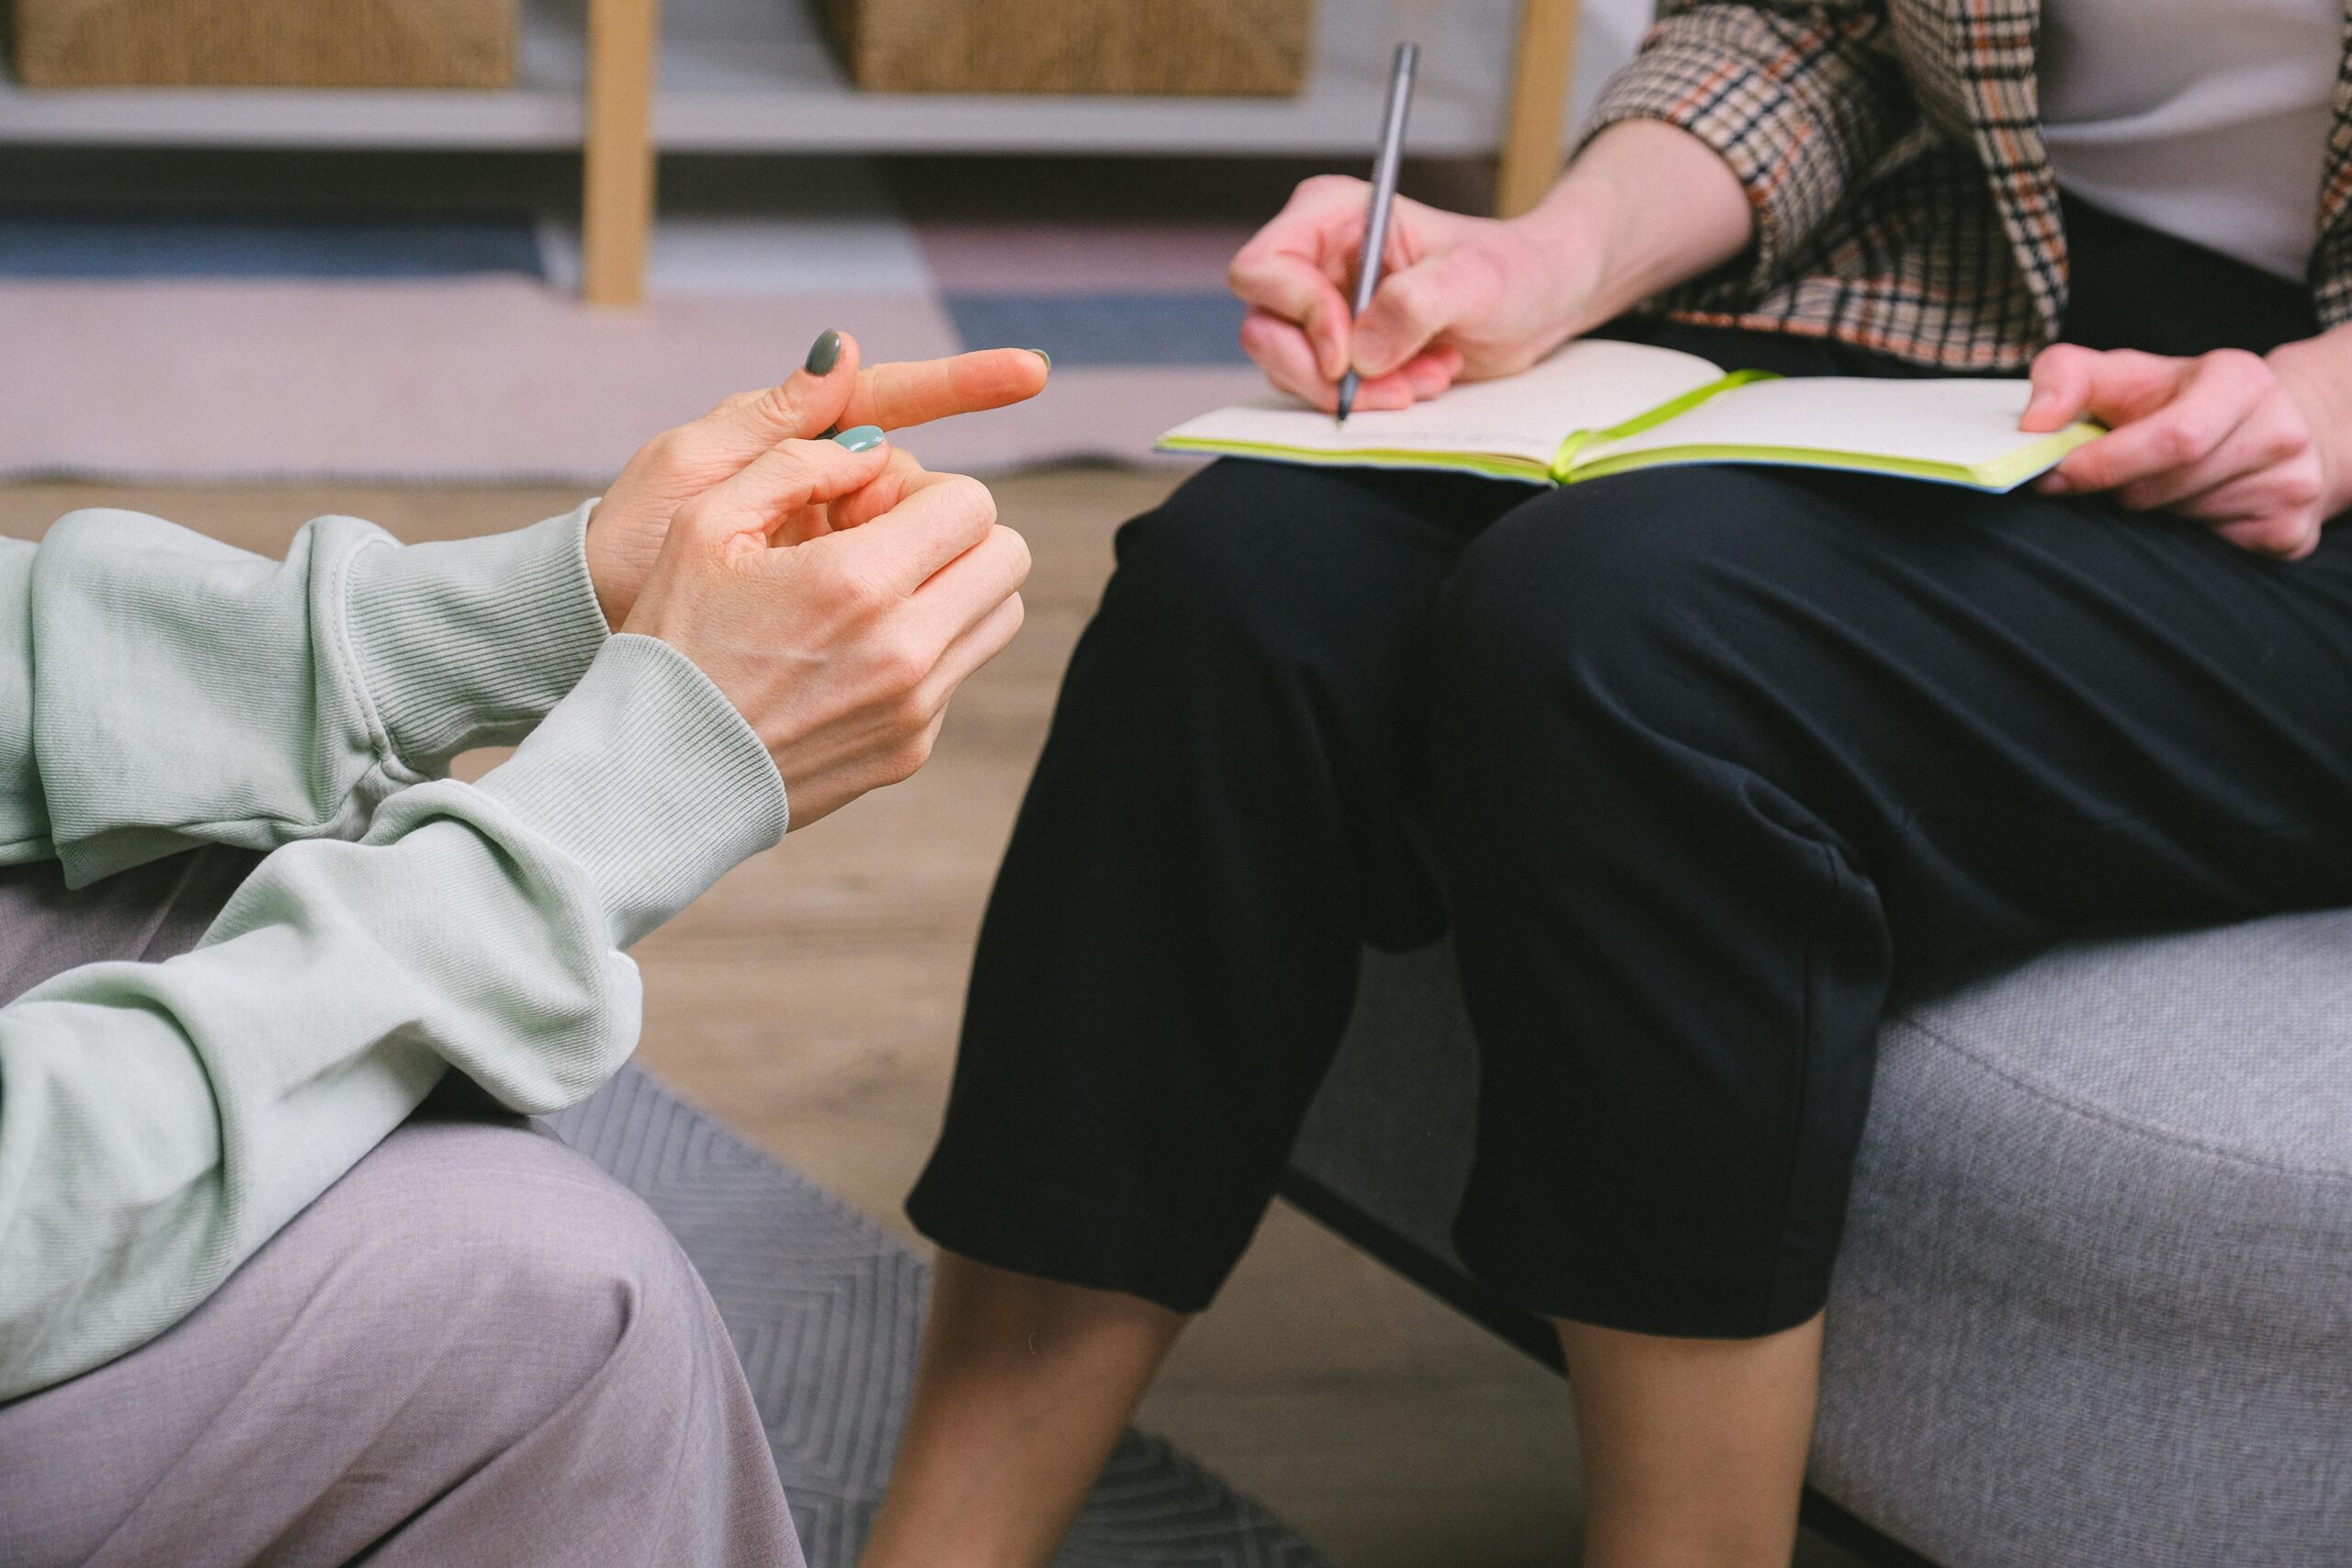 Close-up of a Psychiatric session showing a patient gesturing with their hands while the therapist takes notes in a notebook